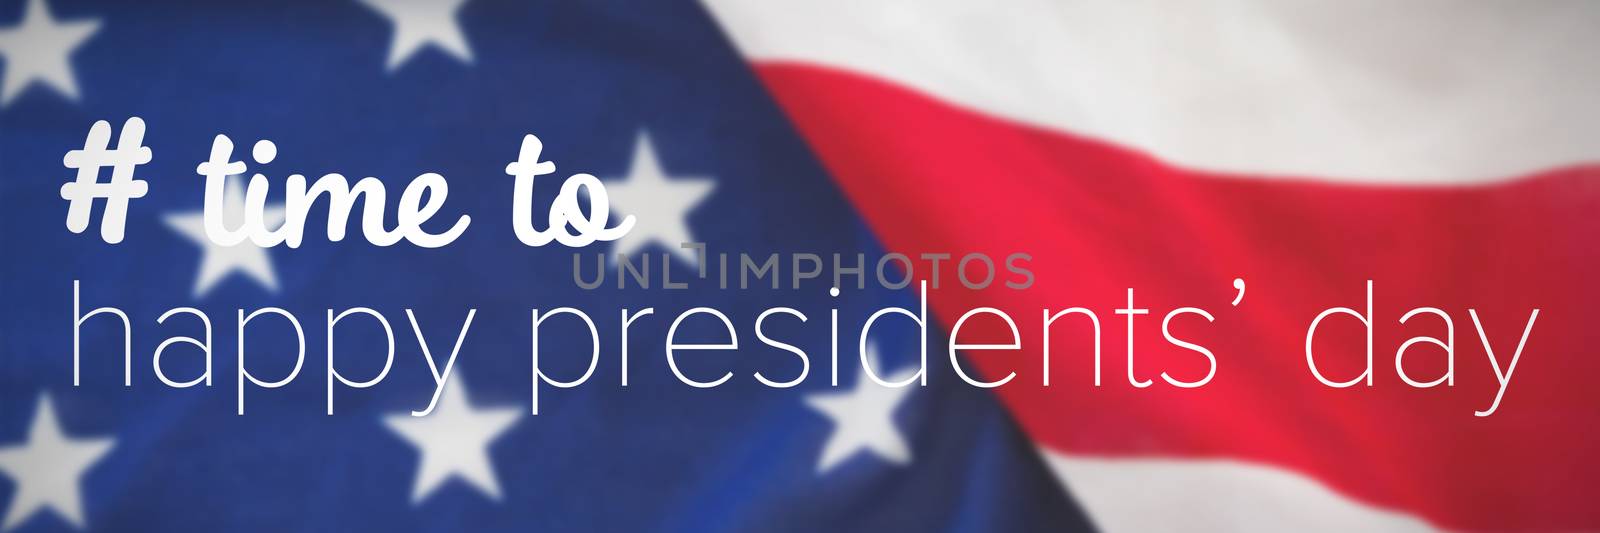 Presidents Day Message with Copy Space by Wavebreakmedia